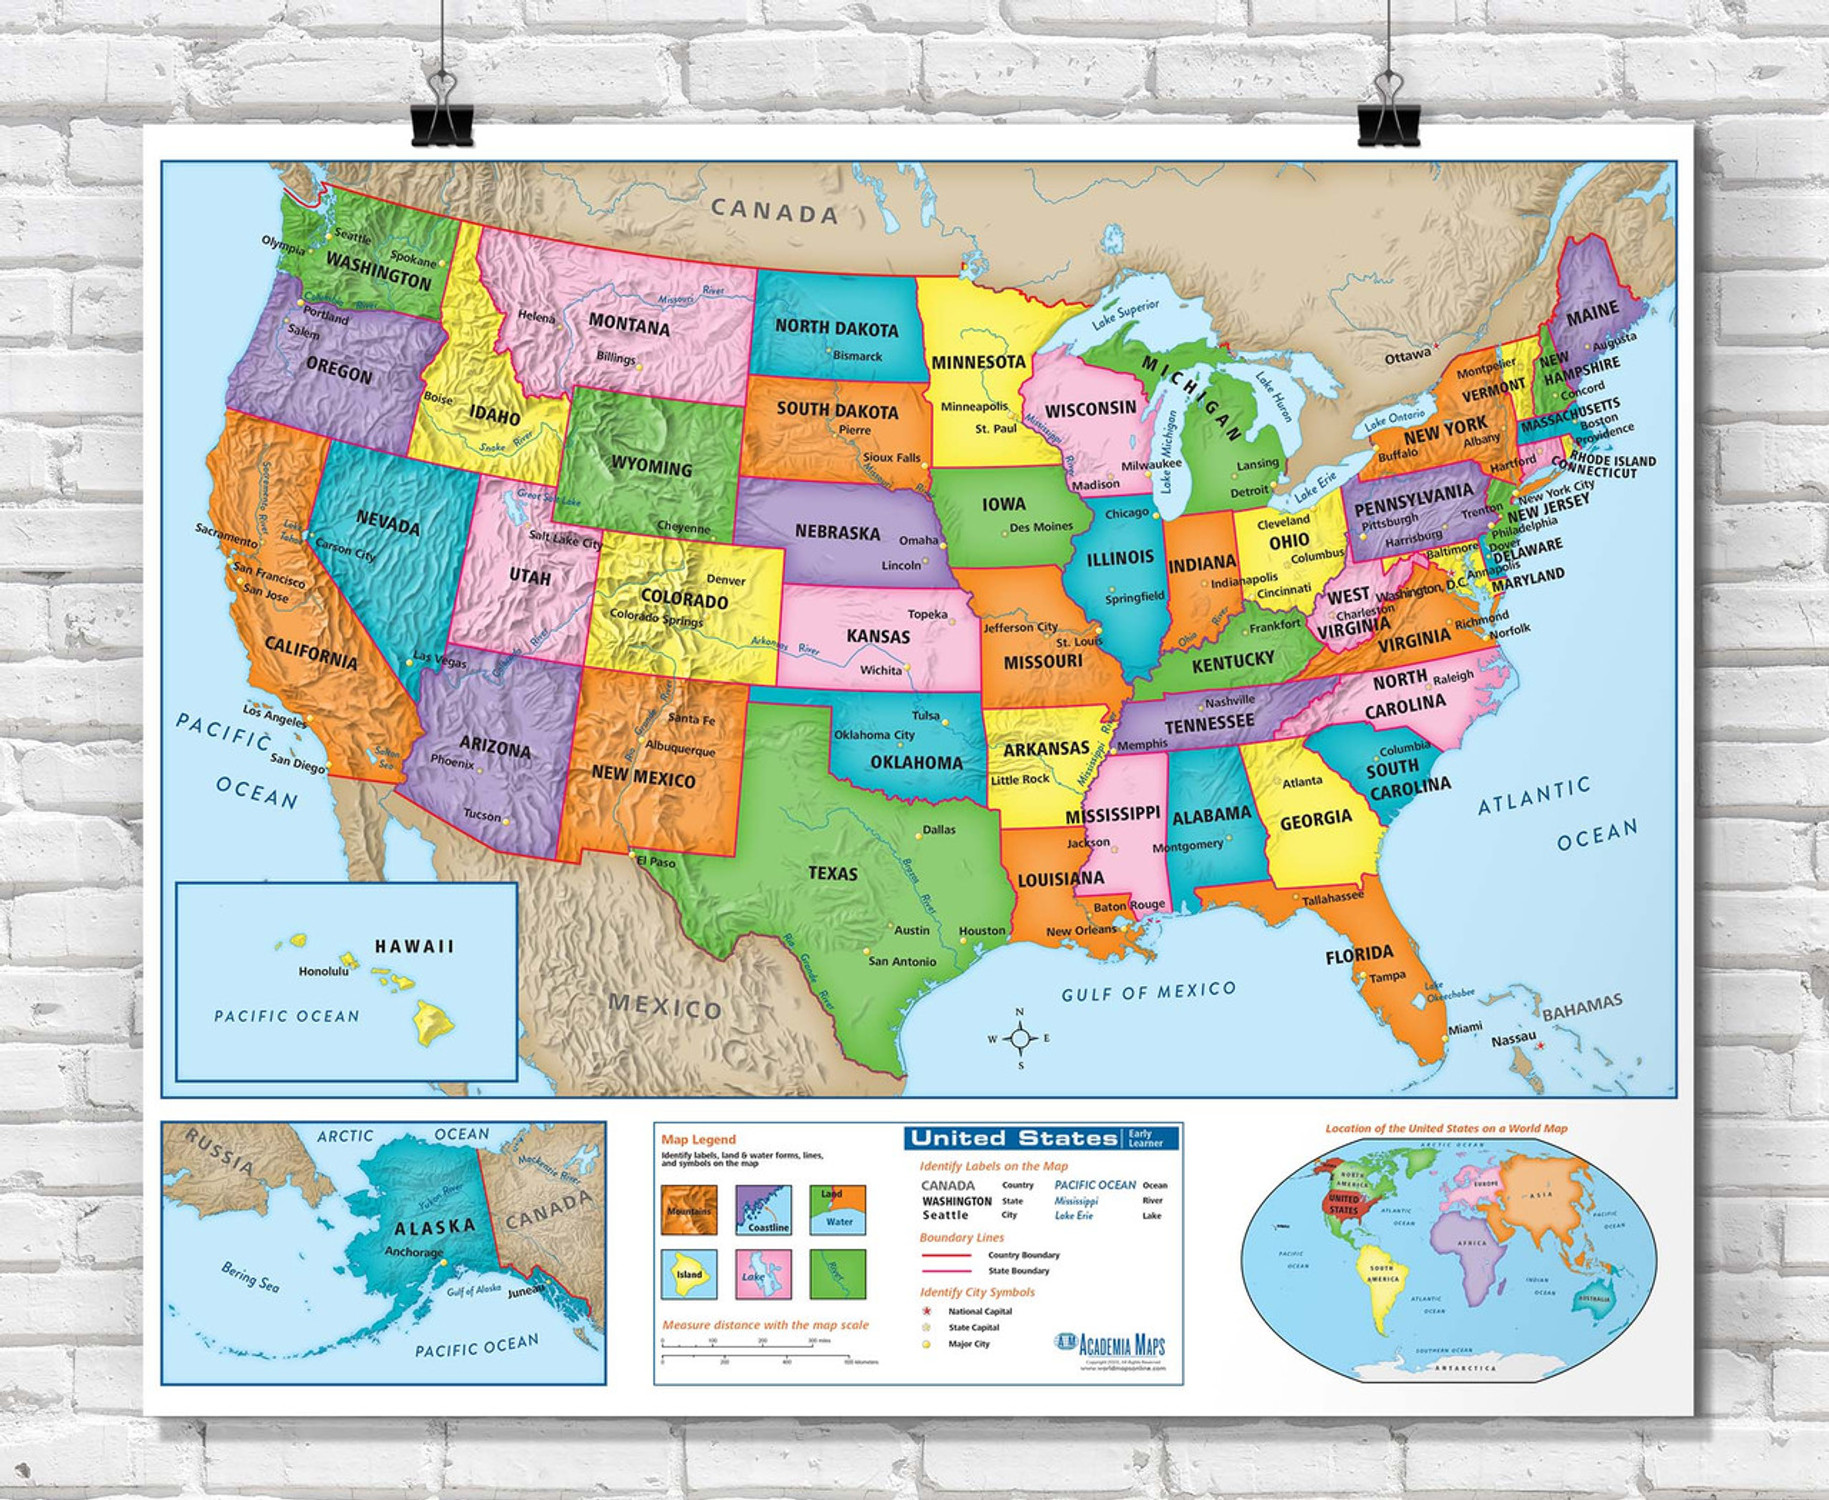 U.S. Early Learner Classroom Wall Map Poster, World Maps Online